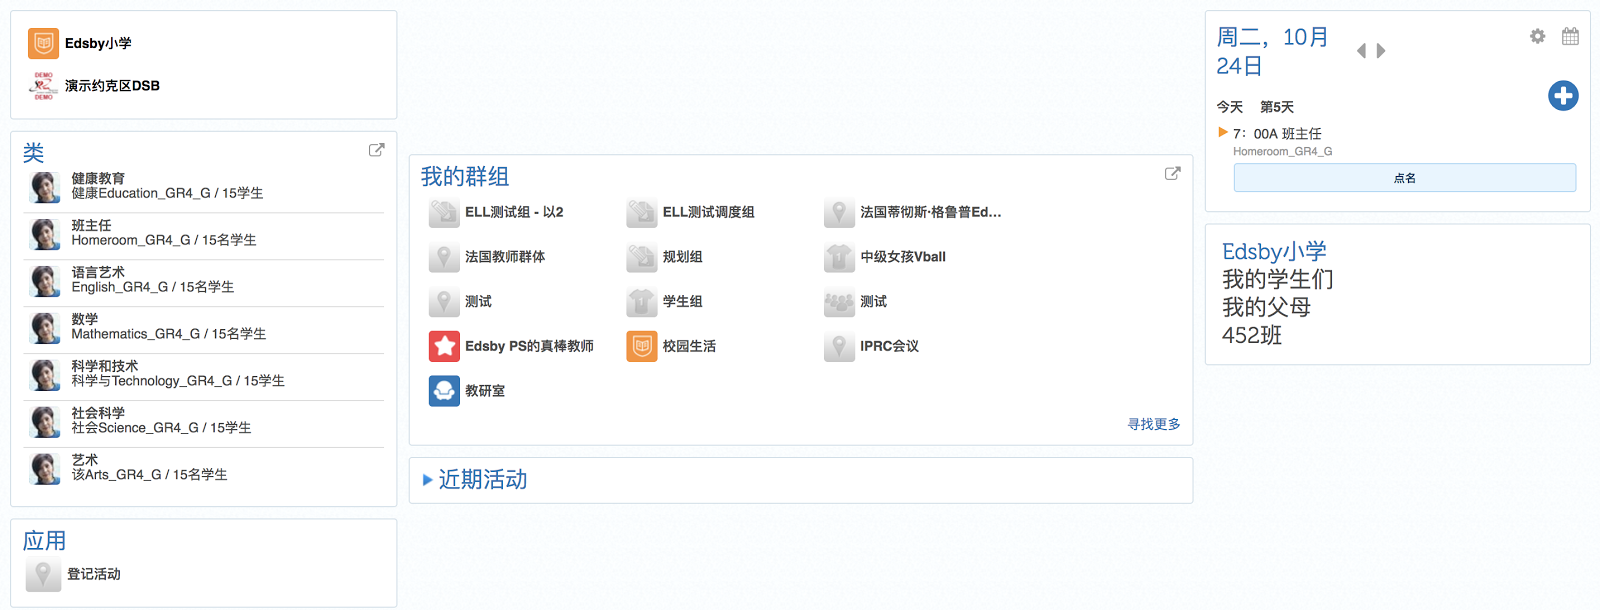 Edsby homepage in Chinese - Simplified